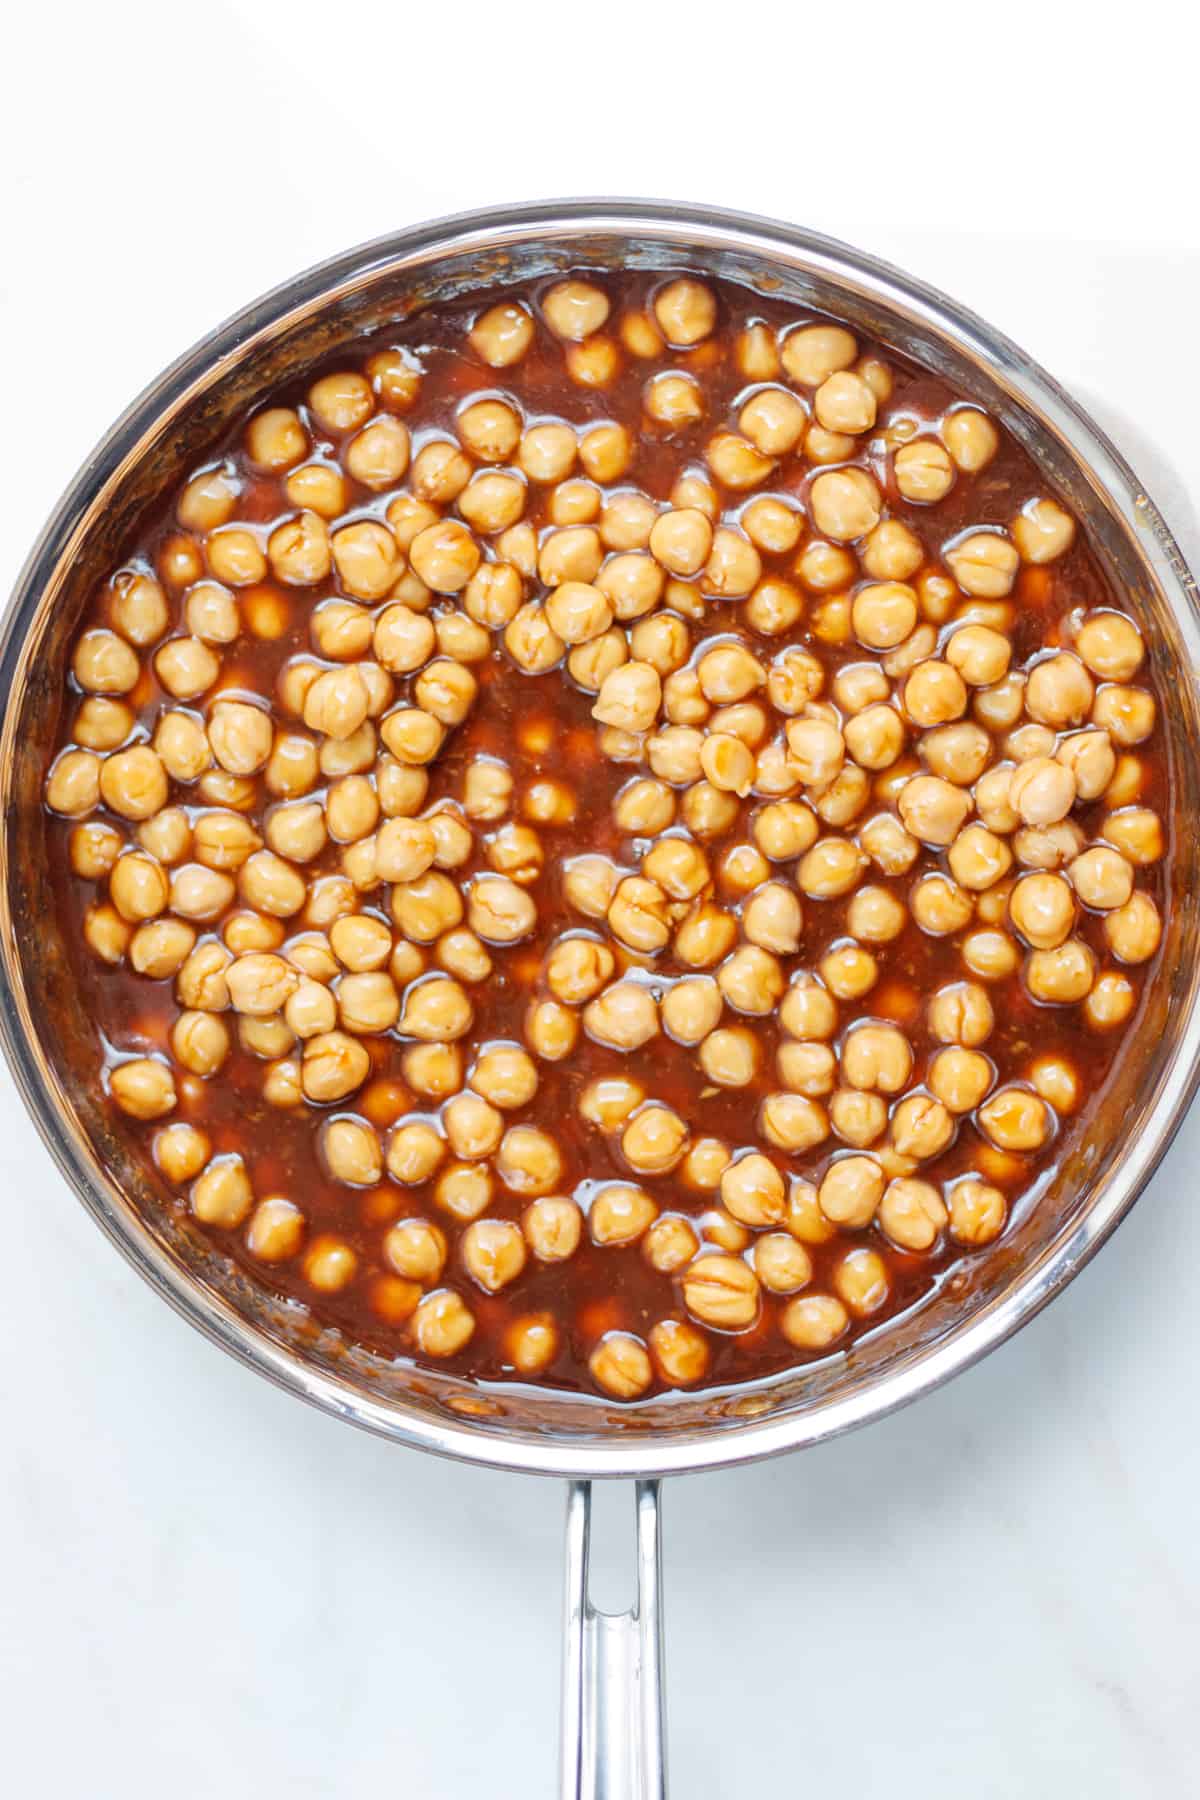 Chickpeas mixed in with the thickened sesame sauce.